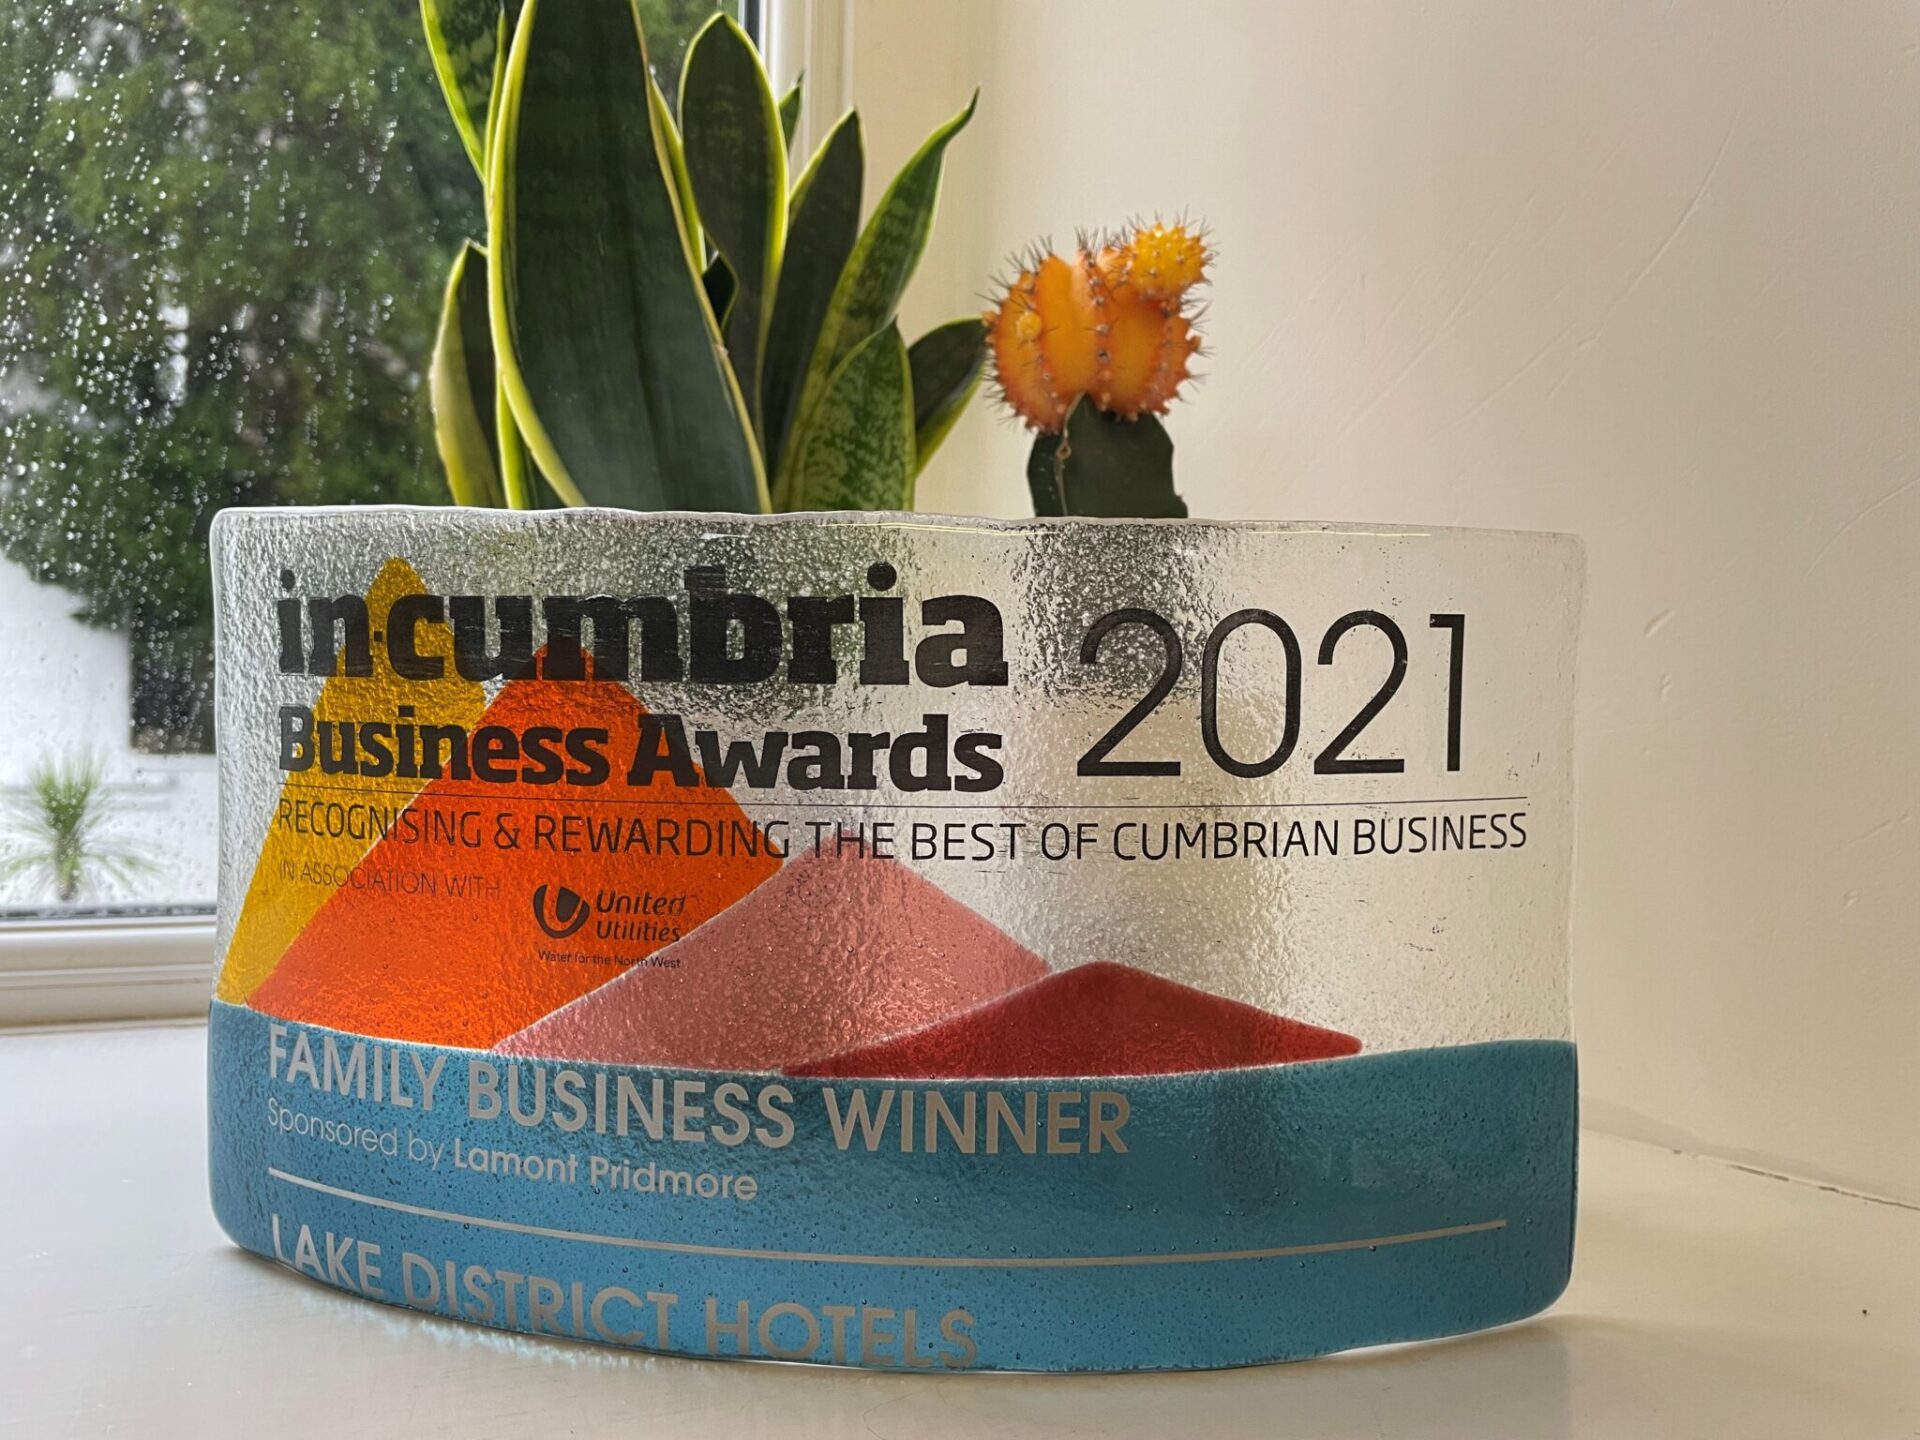 Family Business of the Year at the inCumbria awards